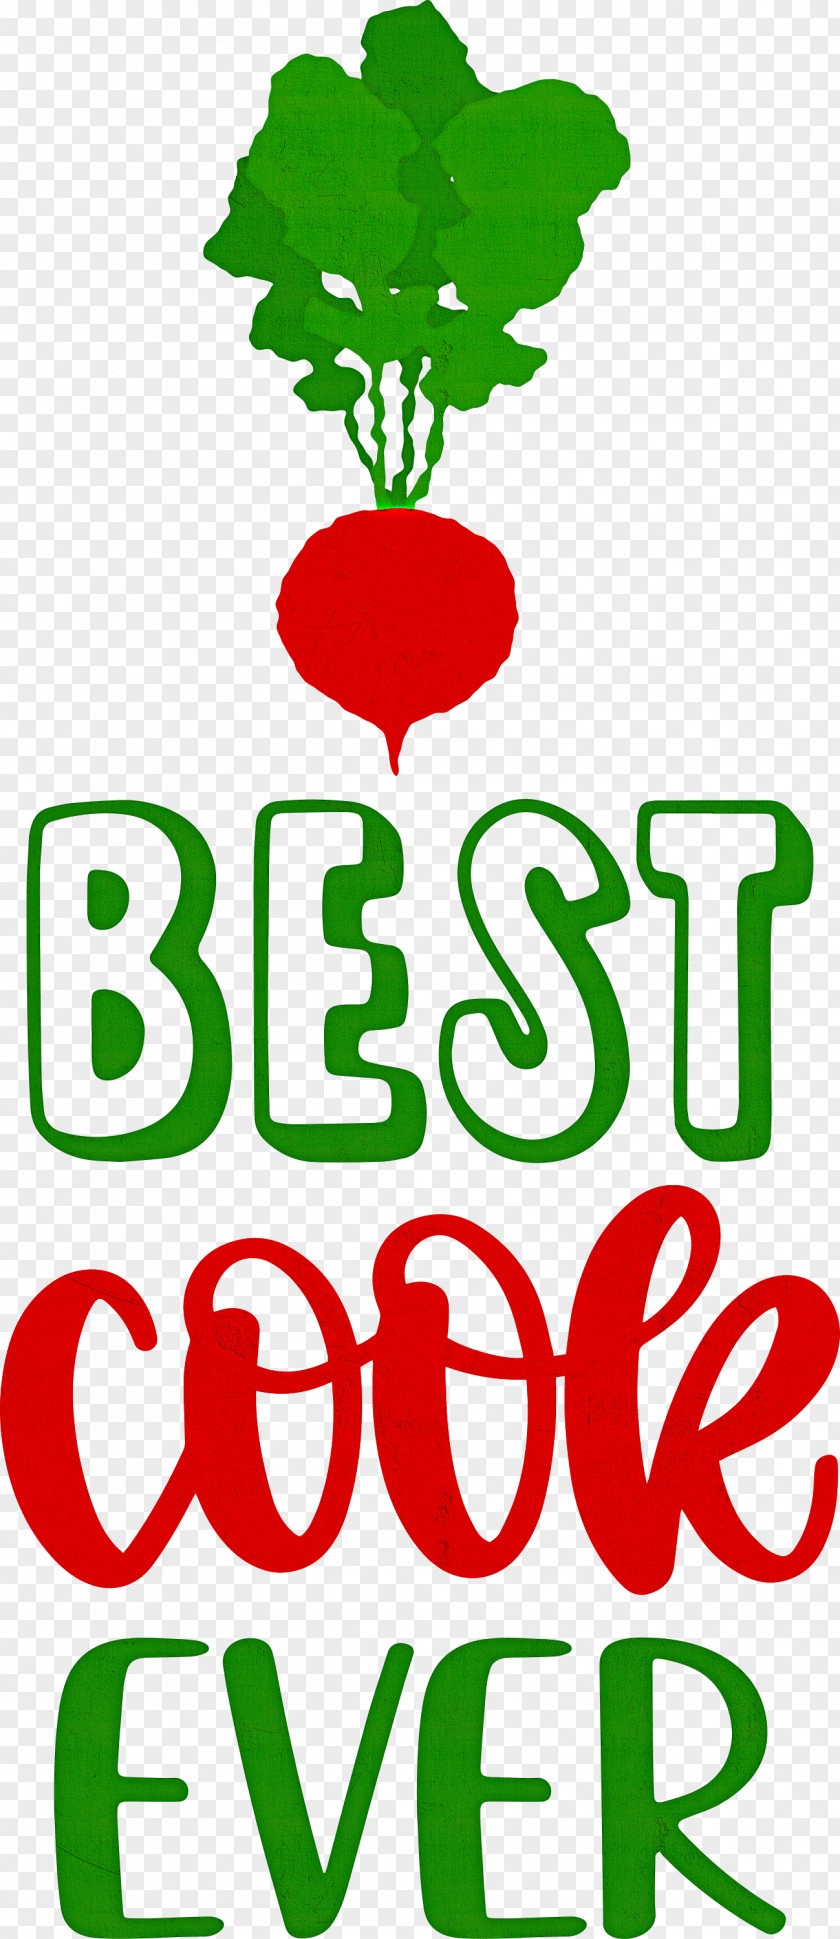 Best Cook Ever Food Kitchen PNG